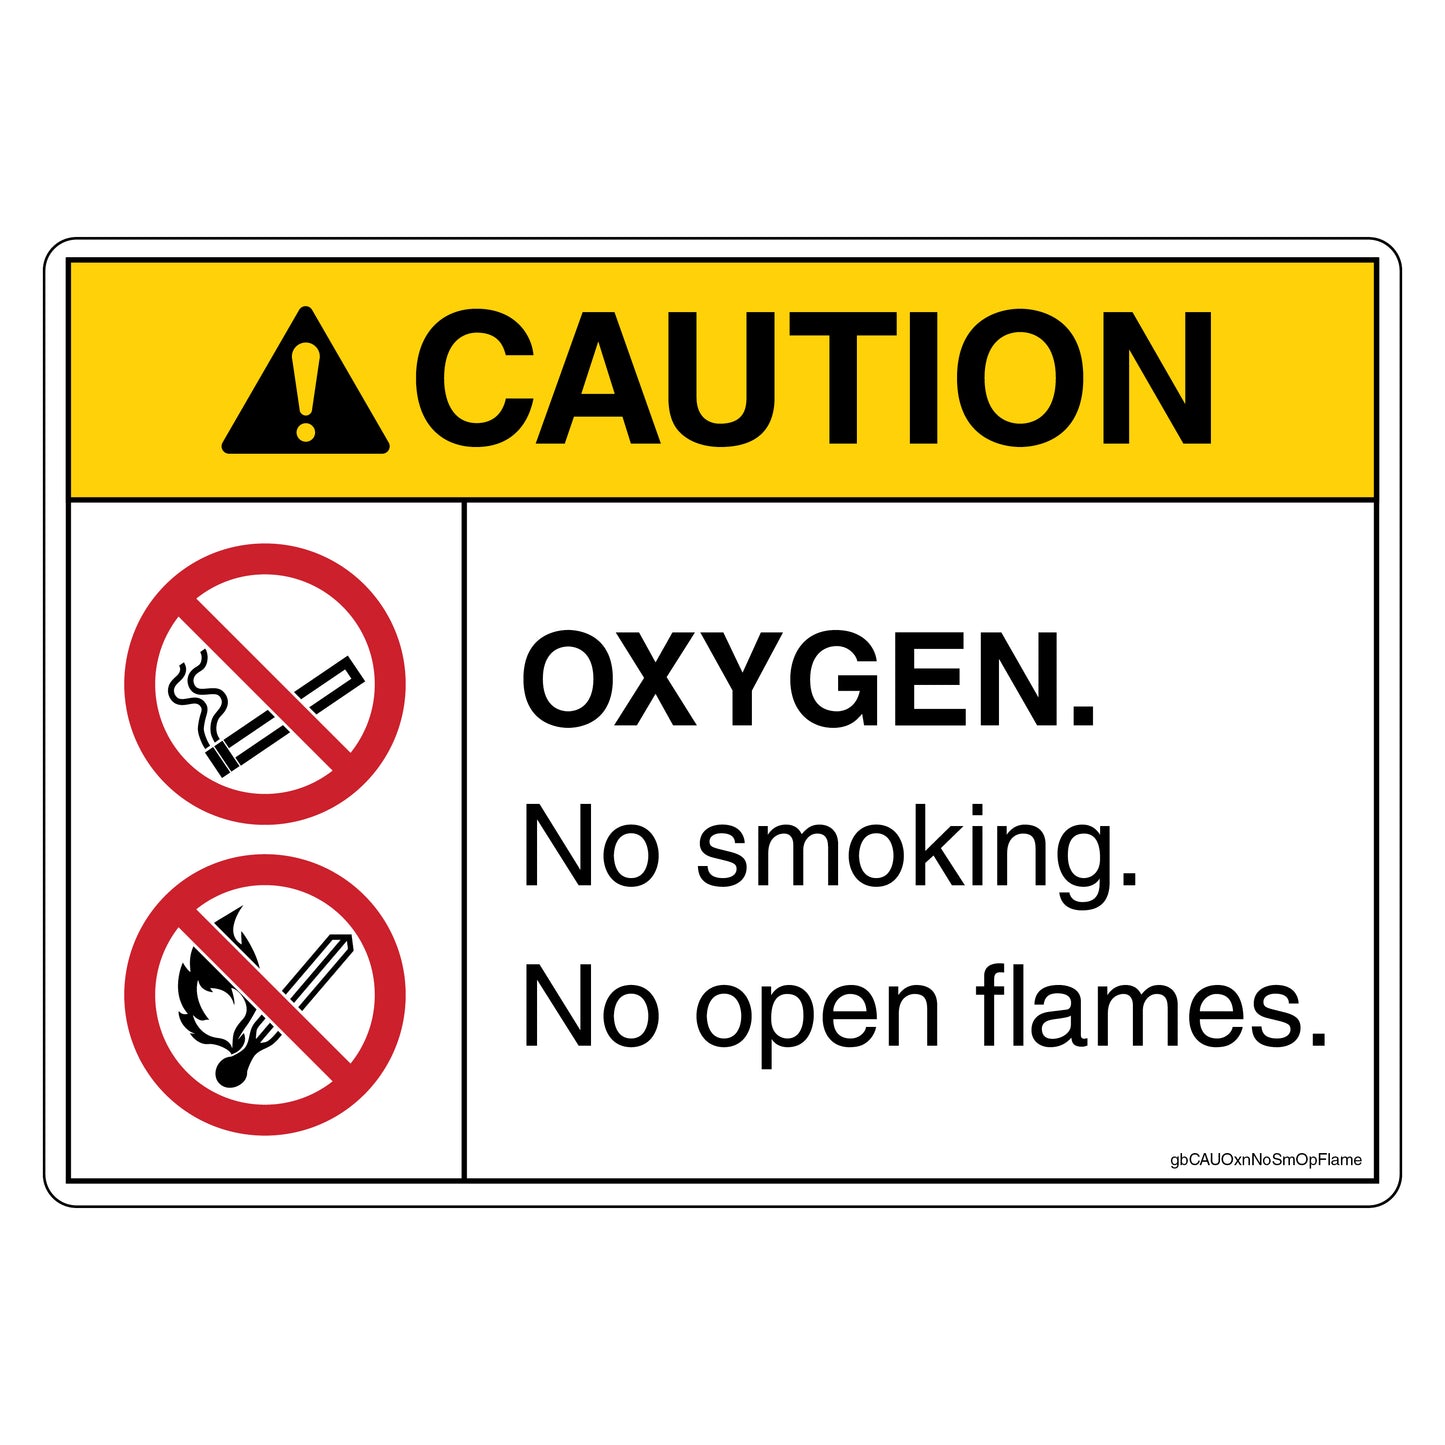 Caution Oxygen No Smoking No Open Flames Decal. 